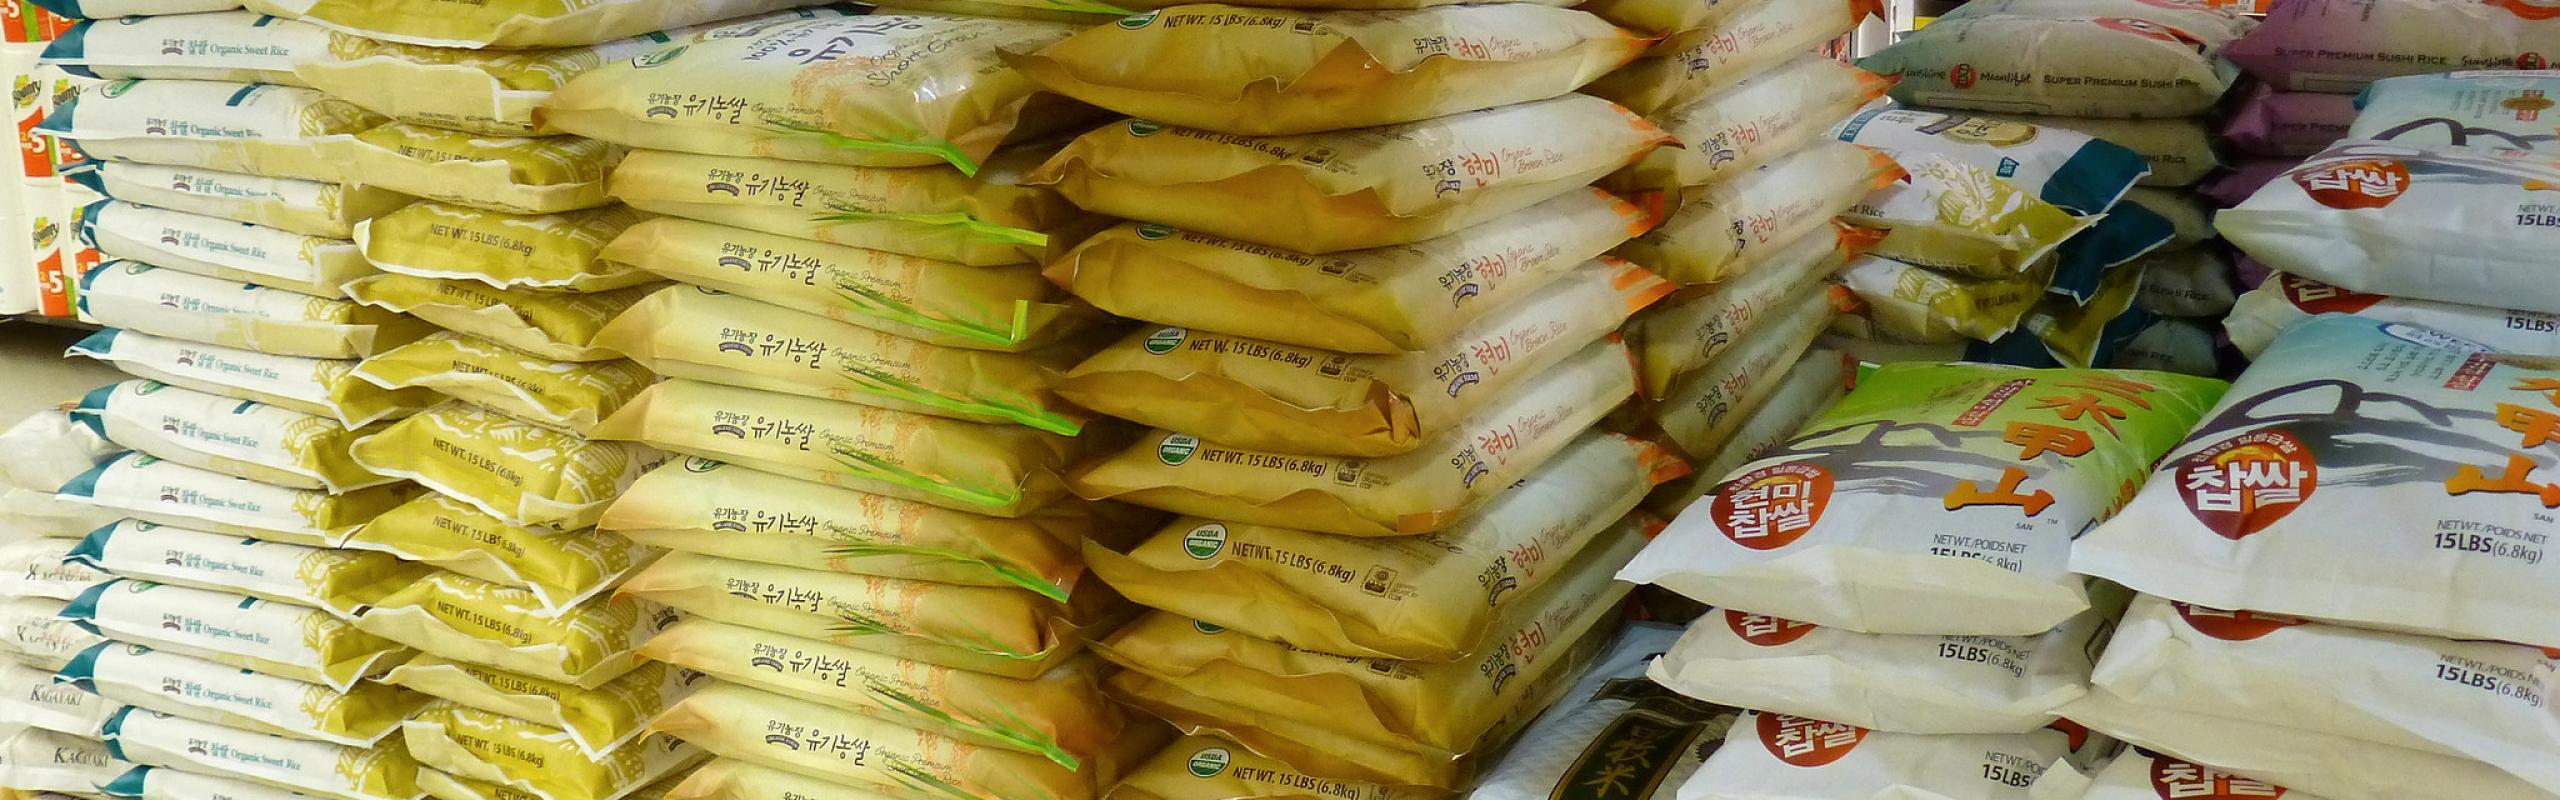 Piles of bags of rice in supermarket